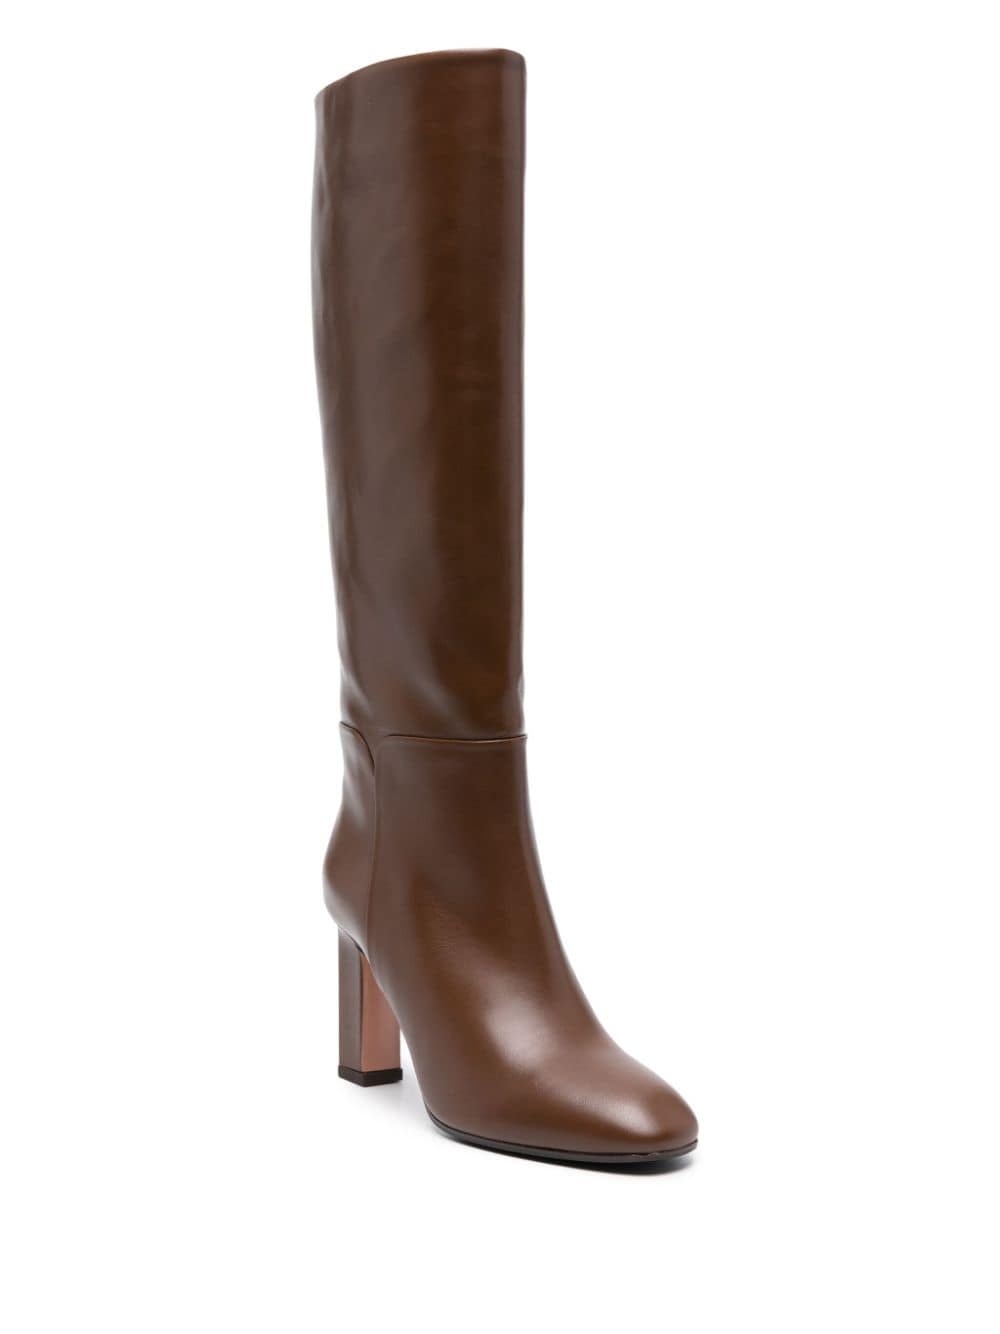 Sellier 85mm leather boots - 2